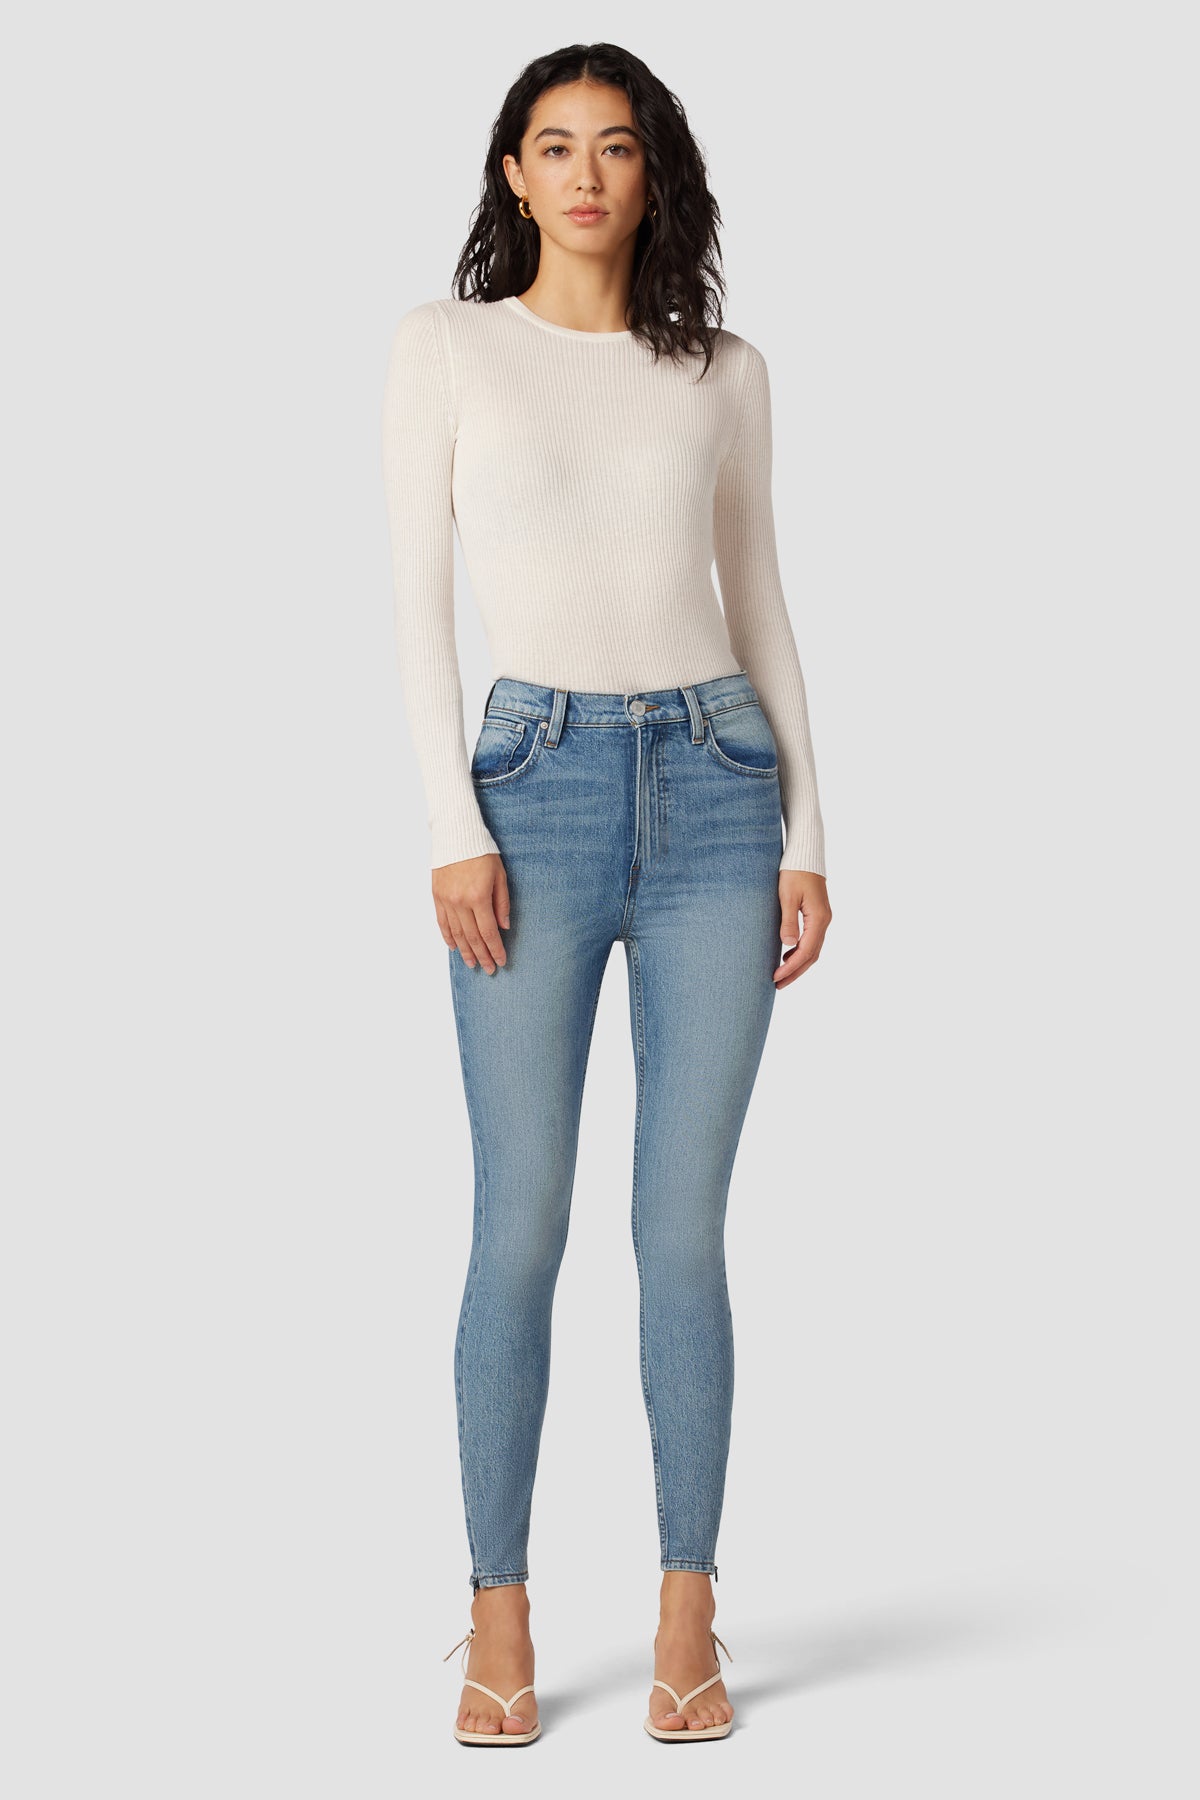 Centerfold Extreme High-Rise Super Skinny Ankle Jean